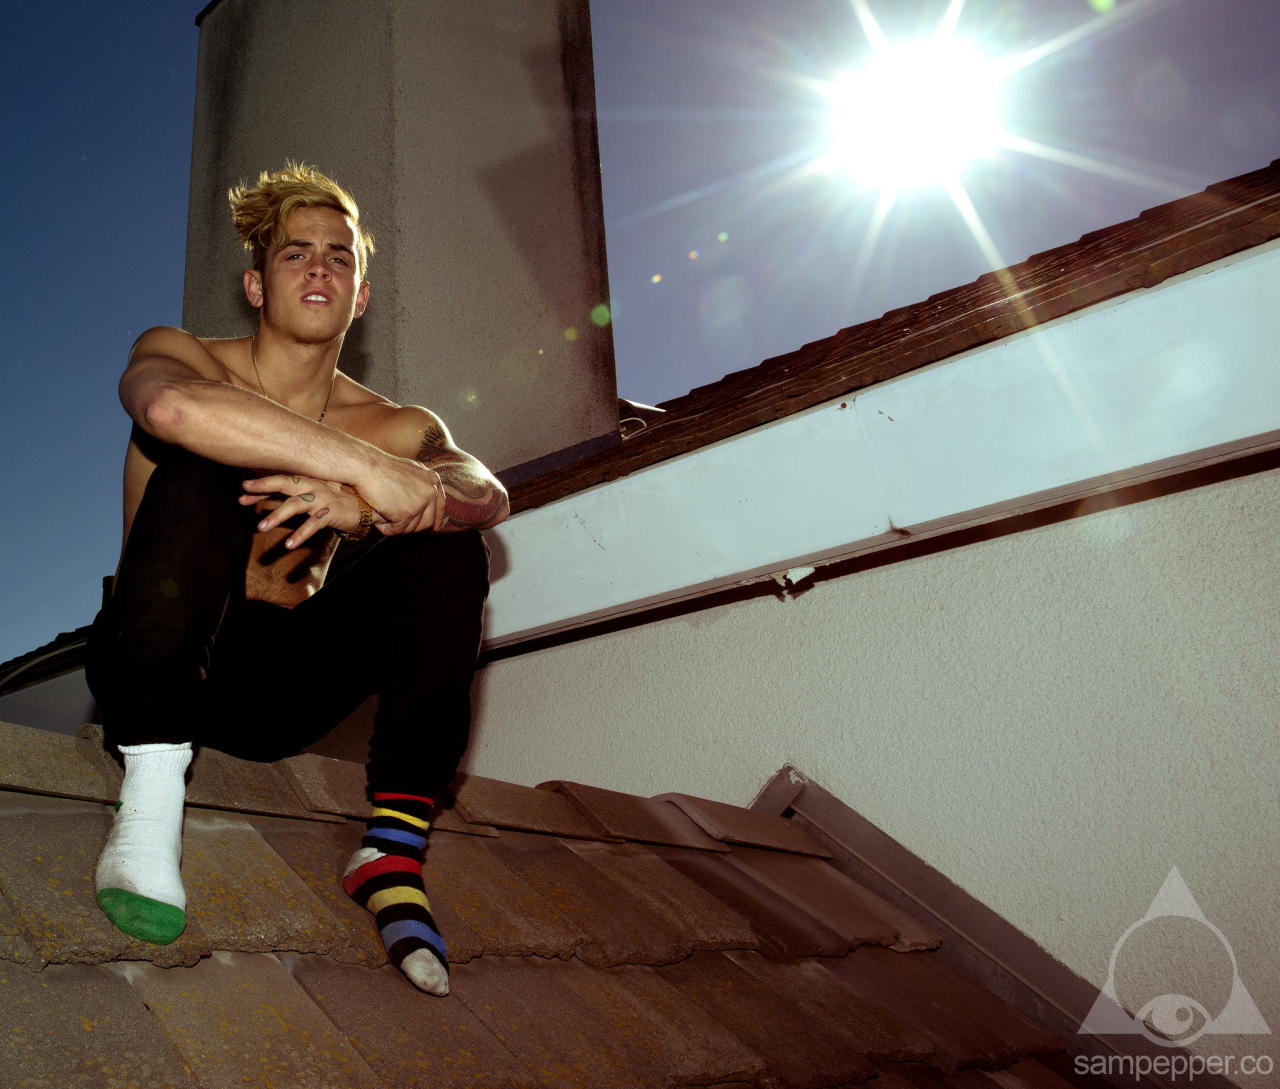 Daniel Sahyounie of the Janoskians on top of a roof in LA!
I love his odd socks in this photo :)  